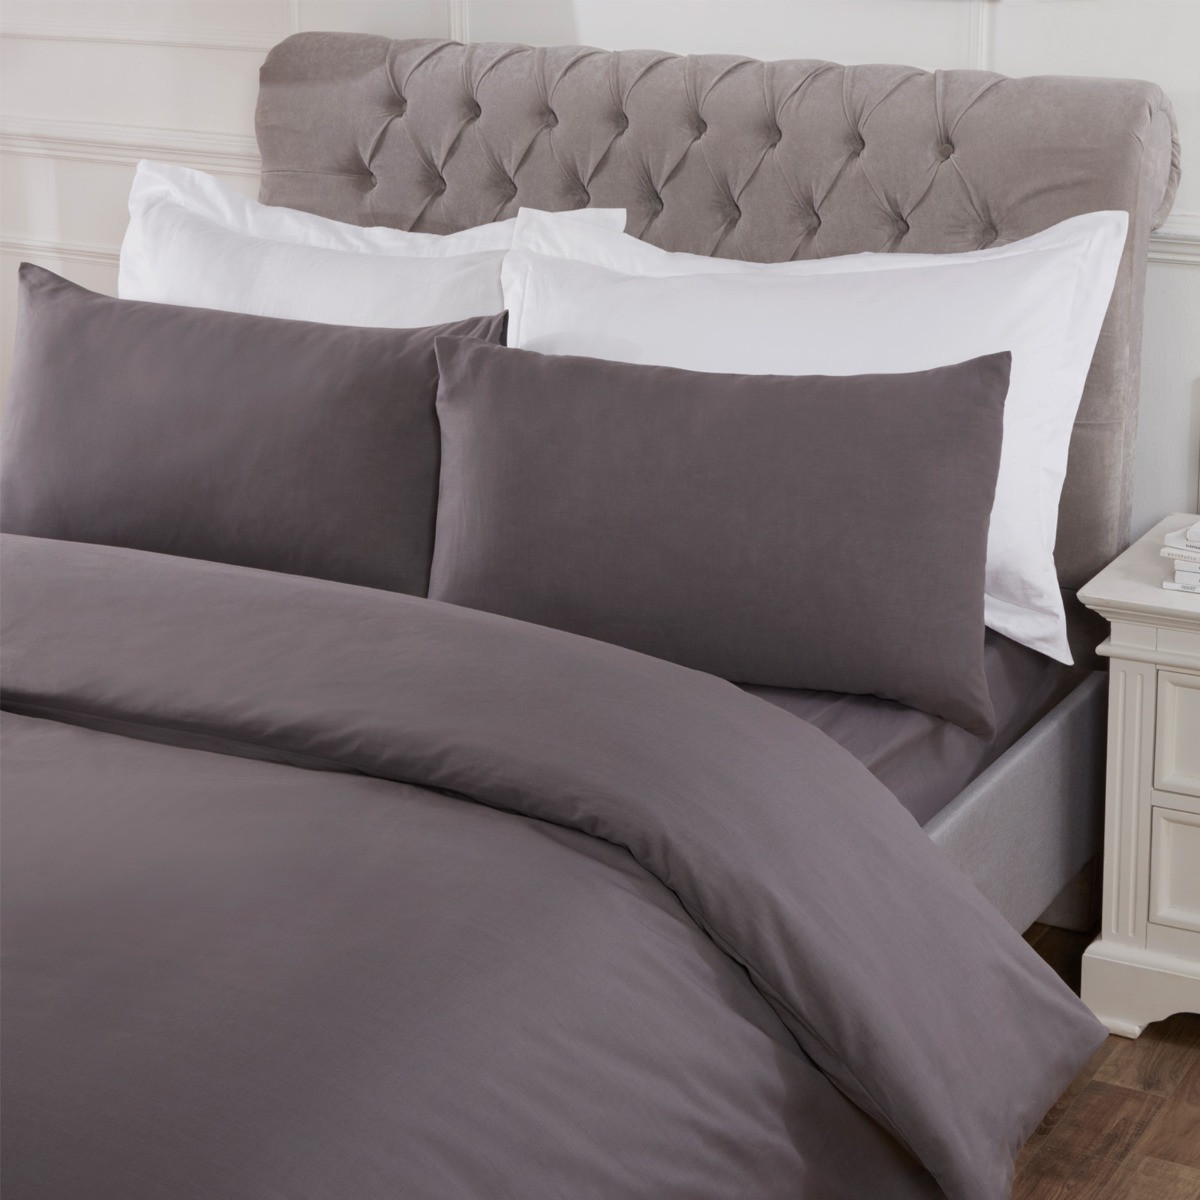 Highams Easy Care Polycotton Duvet Cover Set - Charcoal Grey>